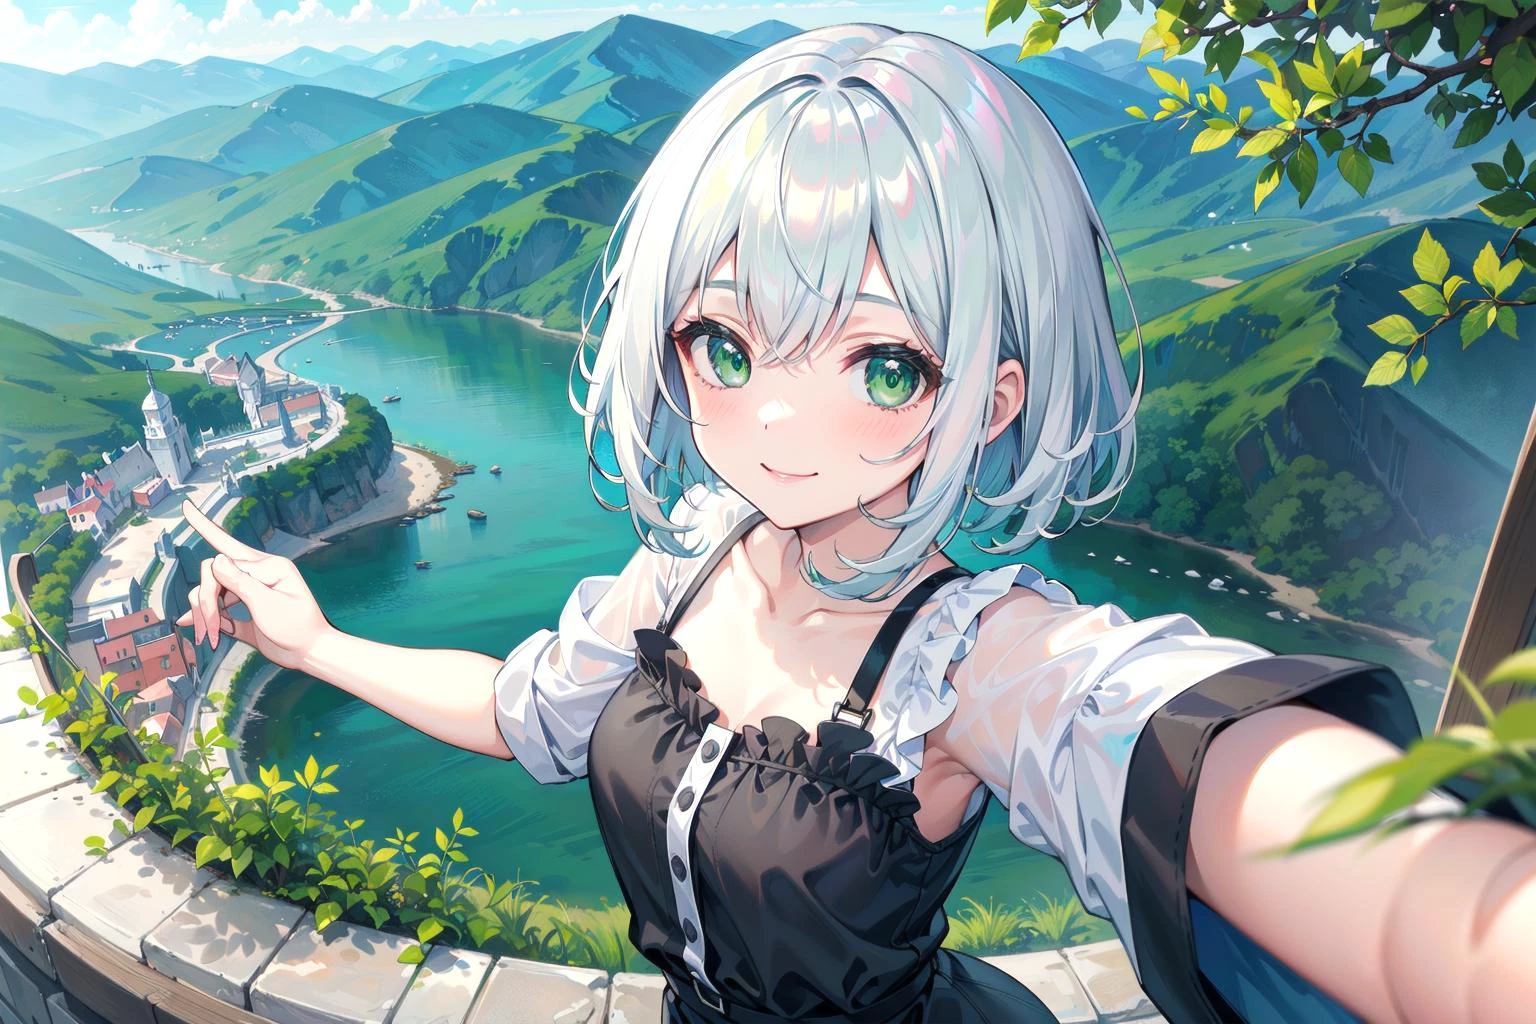 masterpiece, best quality, wide shot from above, green mountain view, a girl with short white hair and green eyes, smile, selfie,